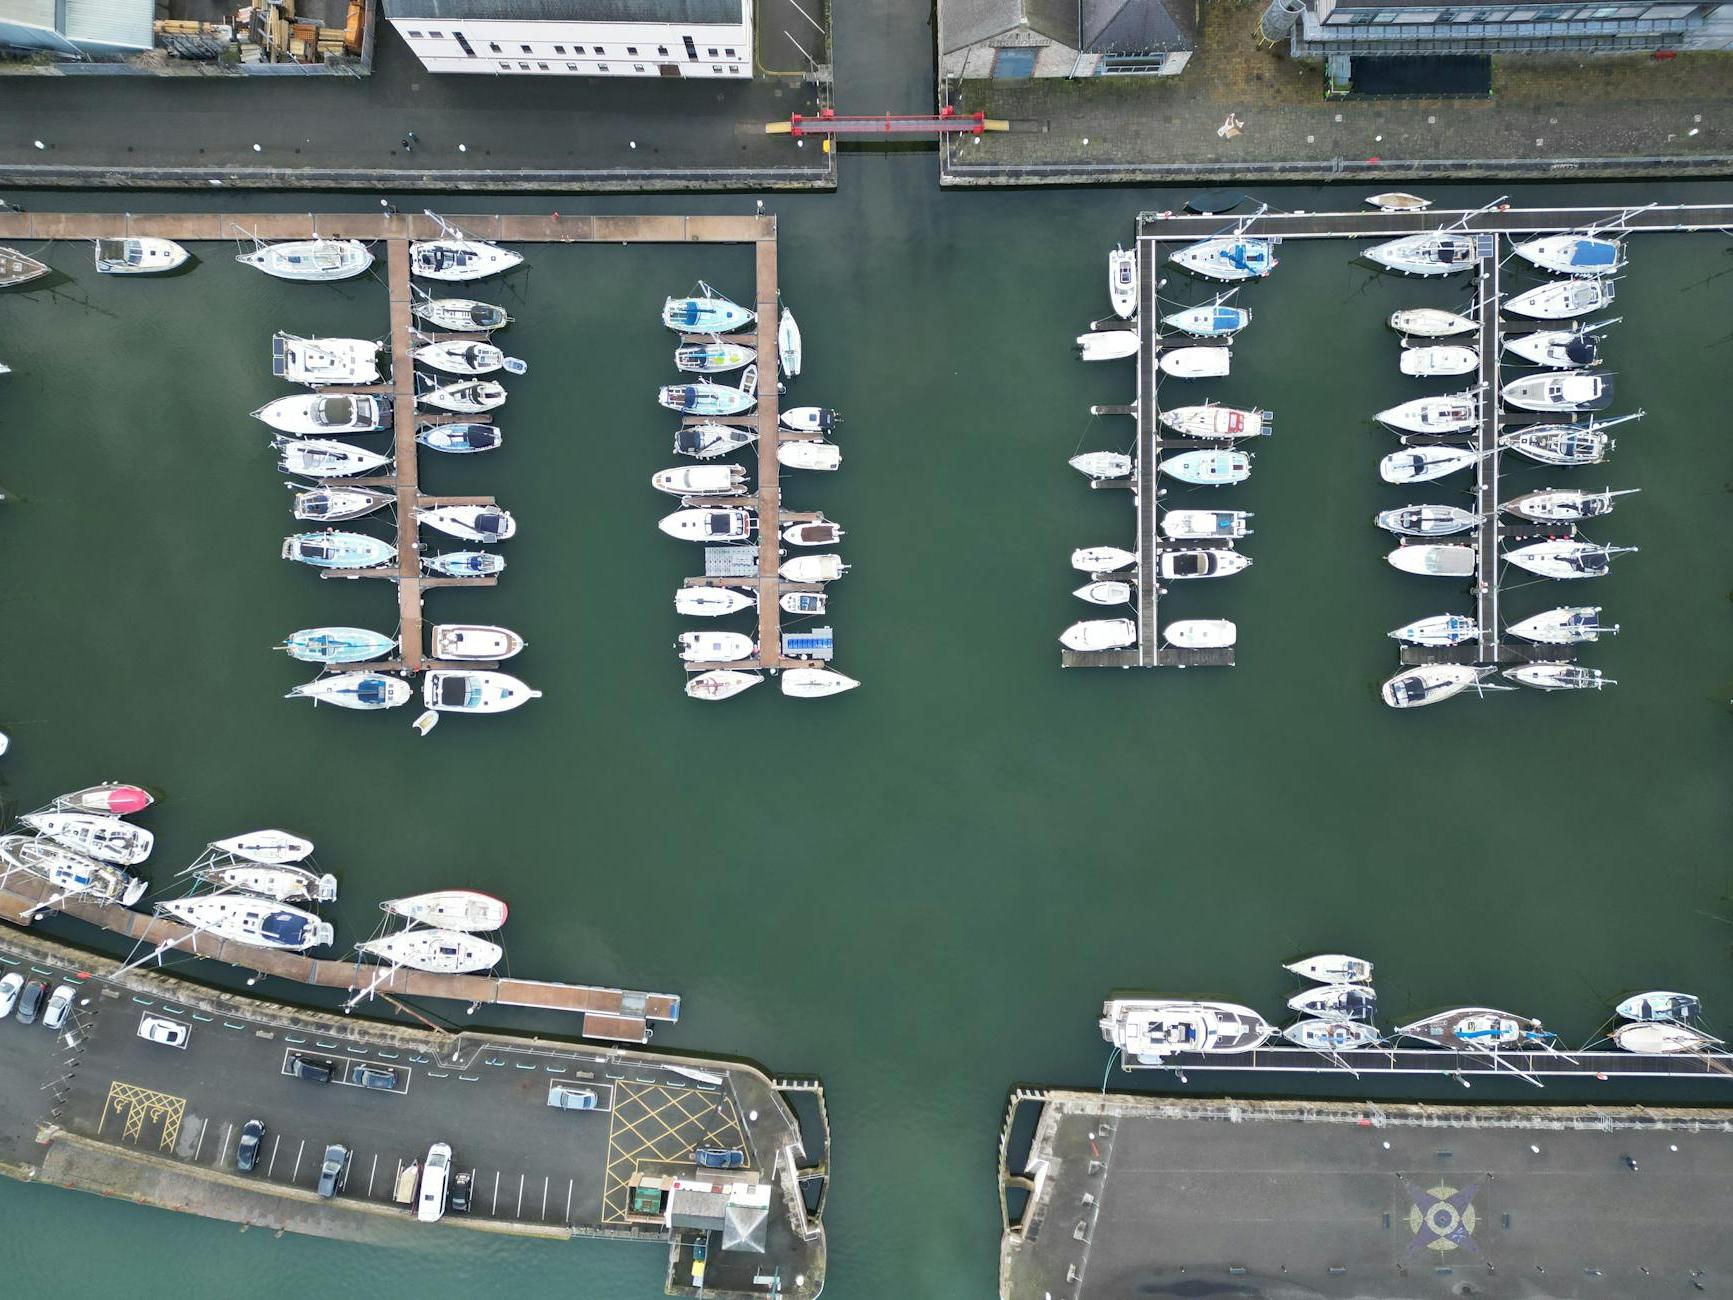 Aerial view of a marina with many boats